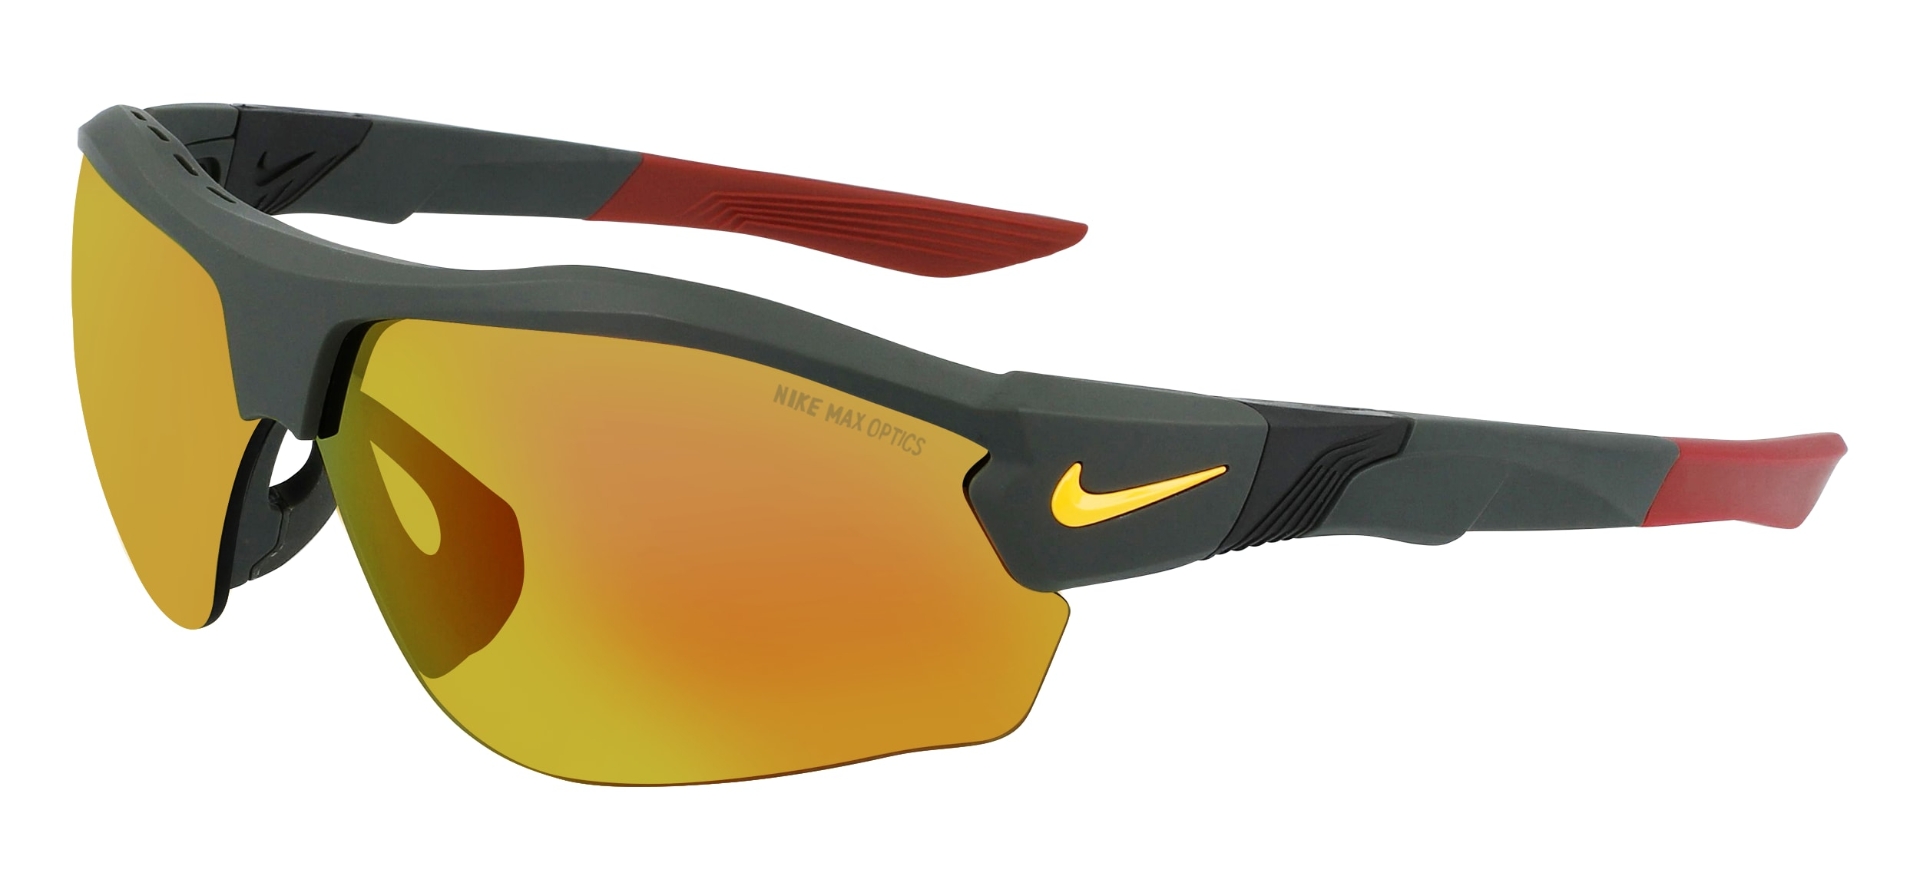 Nike Show X3 sunglasses in grey with red and yellow details and grey/orange lenses.